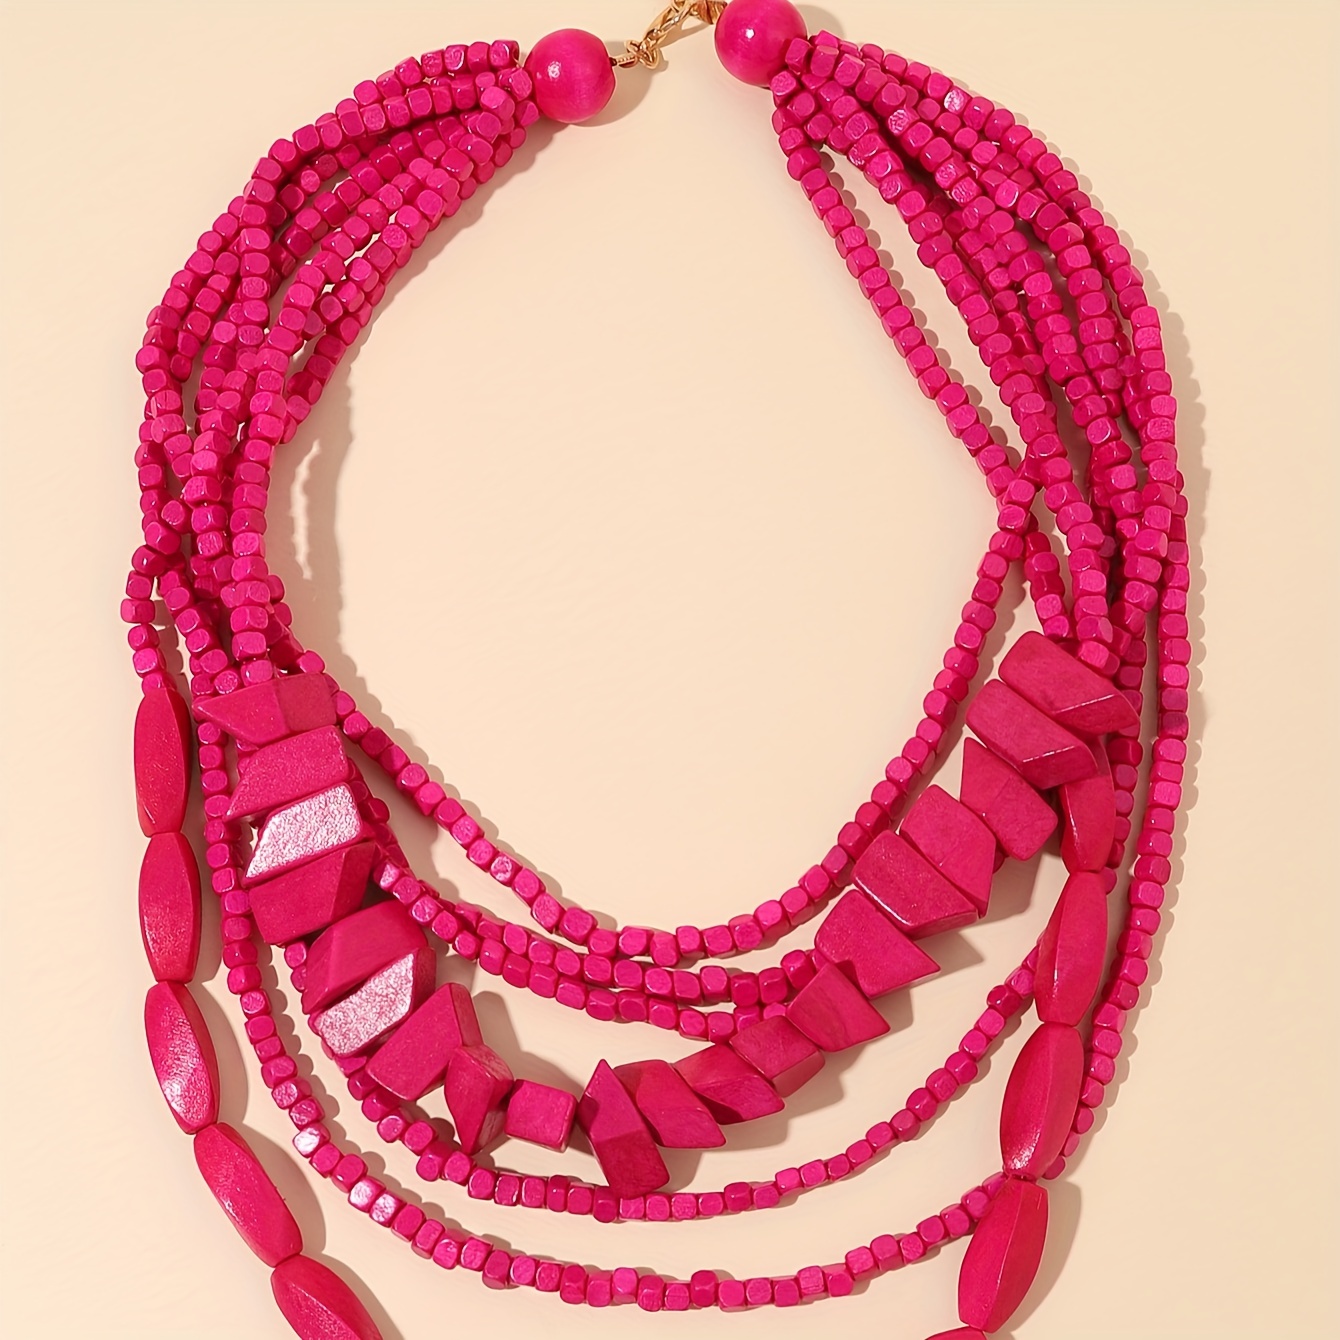 Bohemian Multilayer Seed Beaded Wrap Necklace Pink/Black Fashion Jewelry  For Women And Girls Bulk Shipping From Isang, $2.09